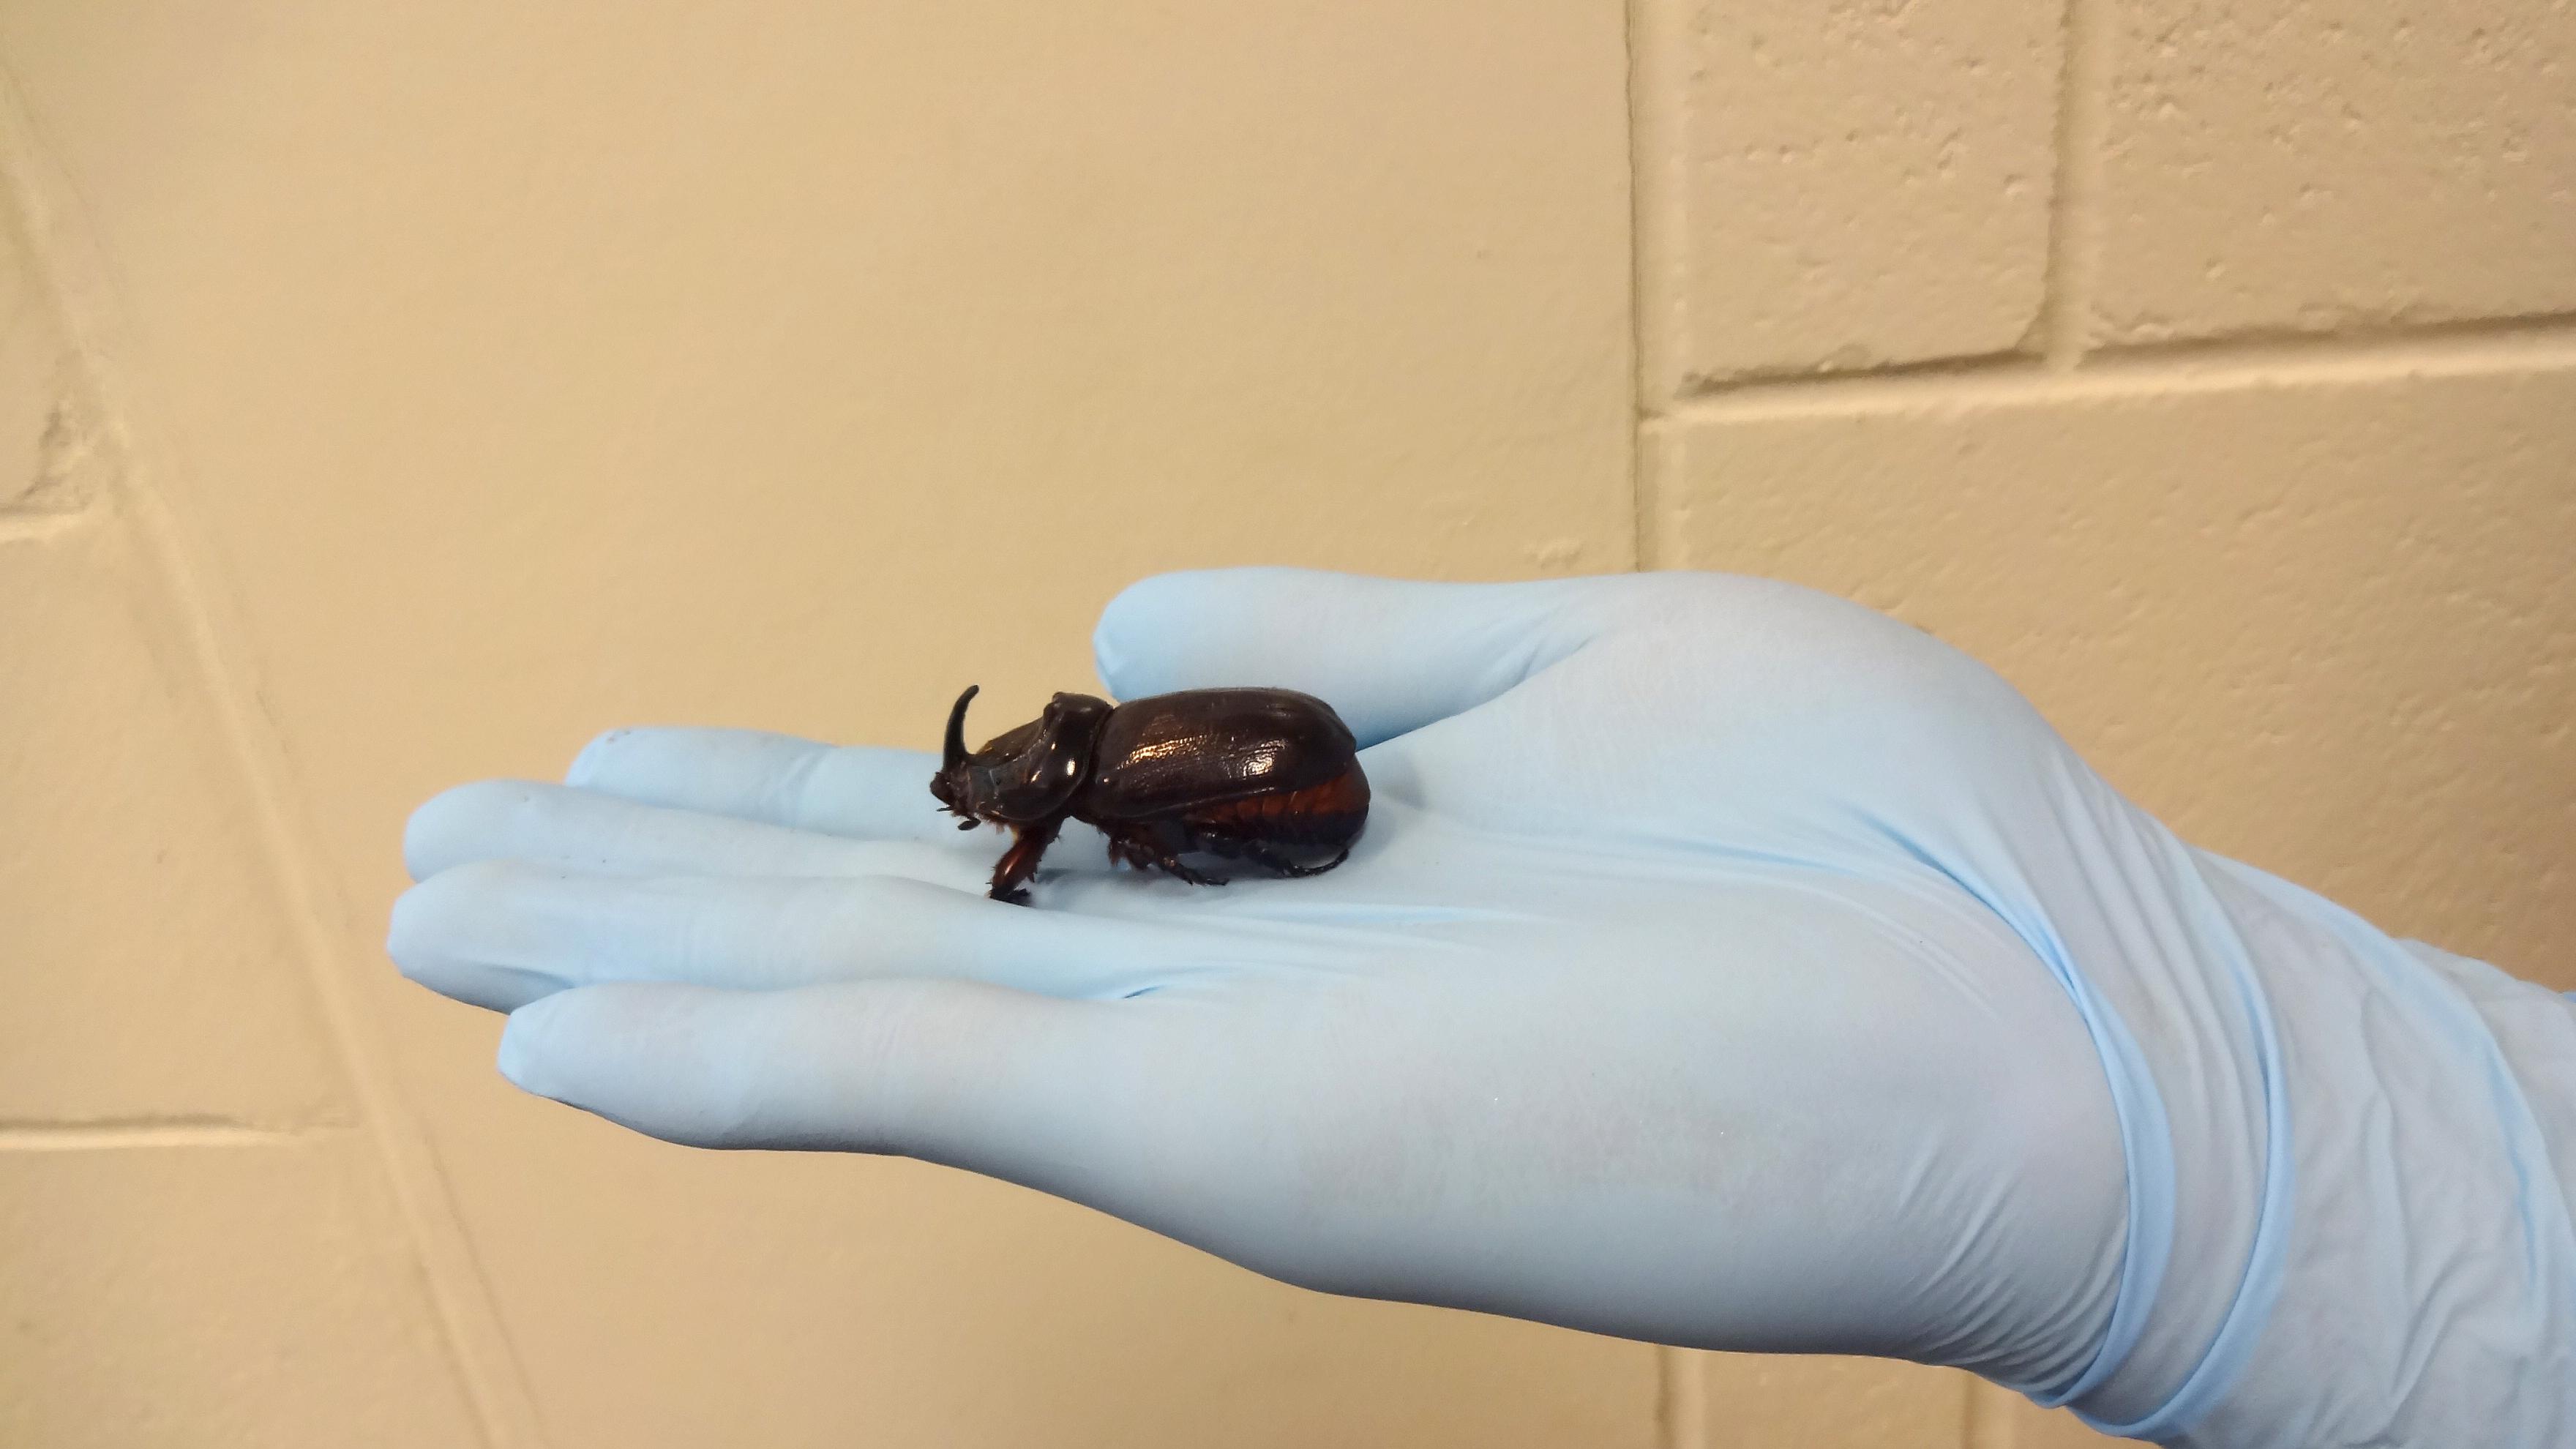 Male coconut rhinoceros beetle on a person's gloved hand; beetle is brownish-black and measures about 2 inches long.